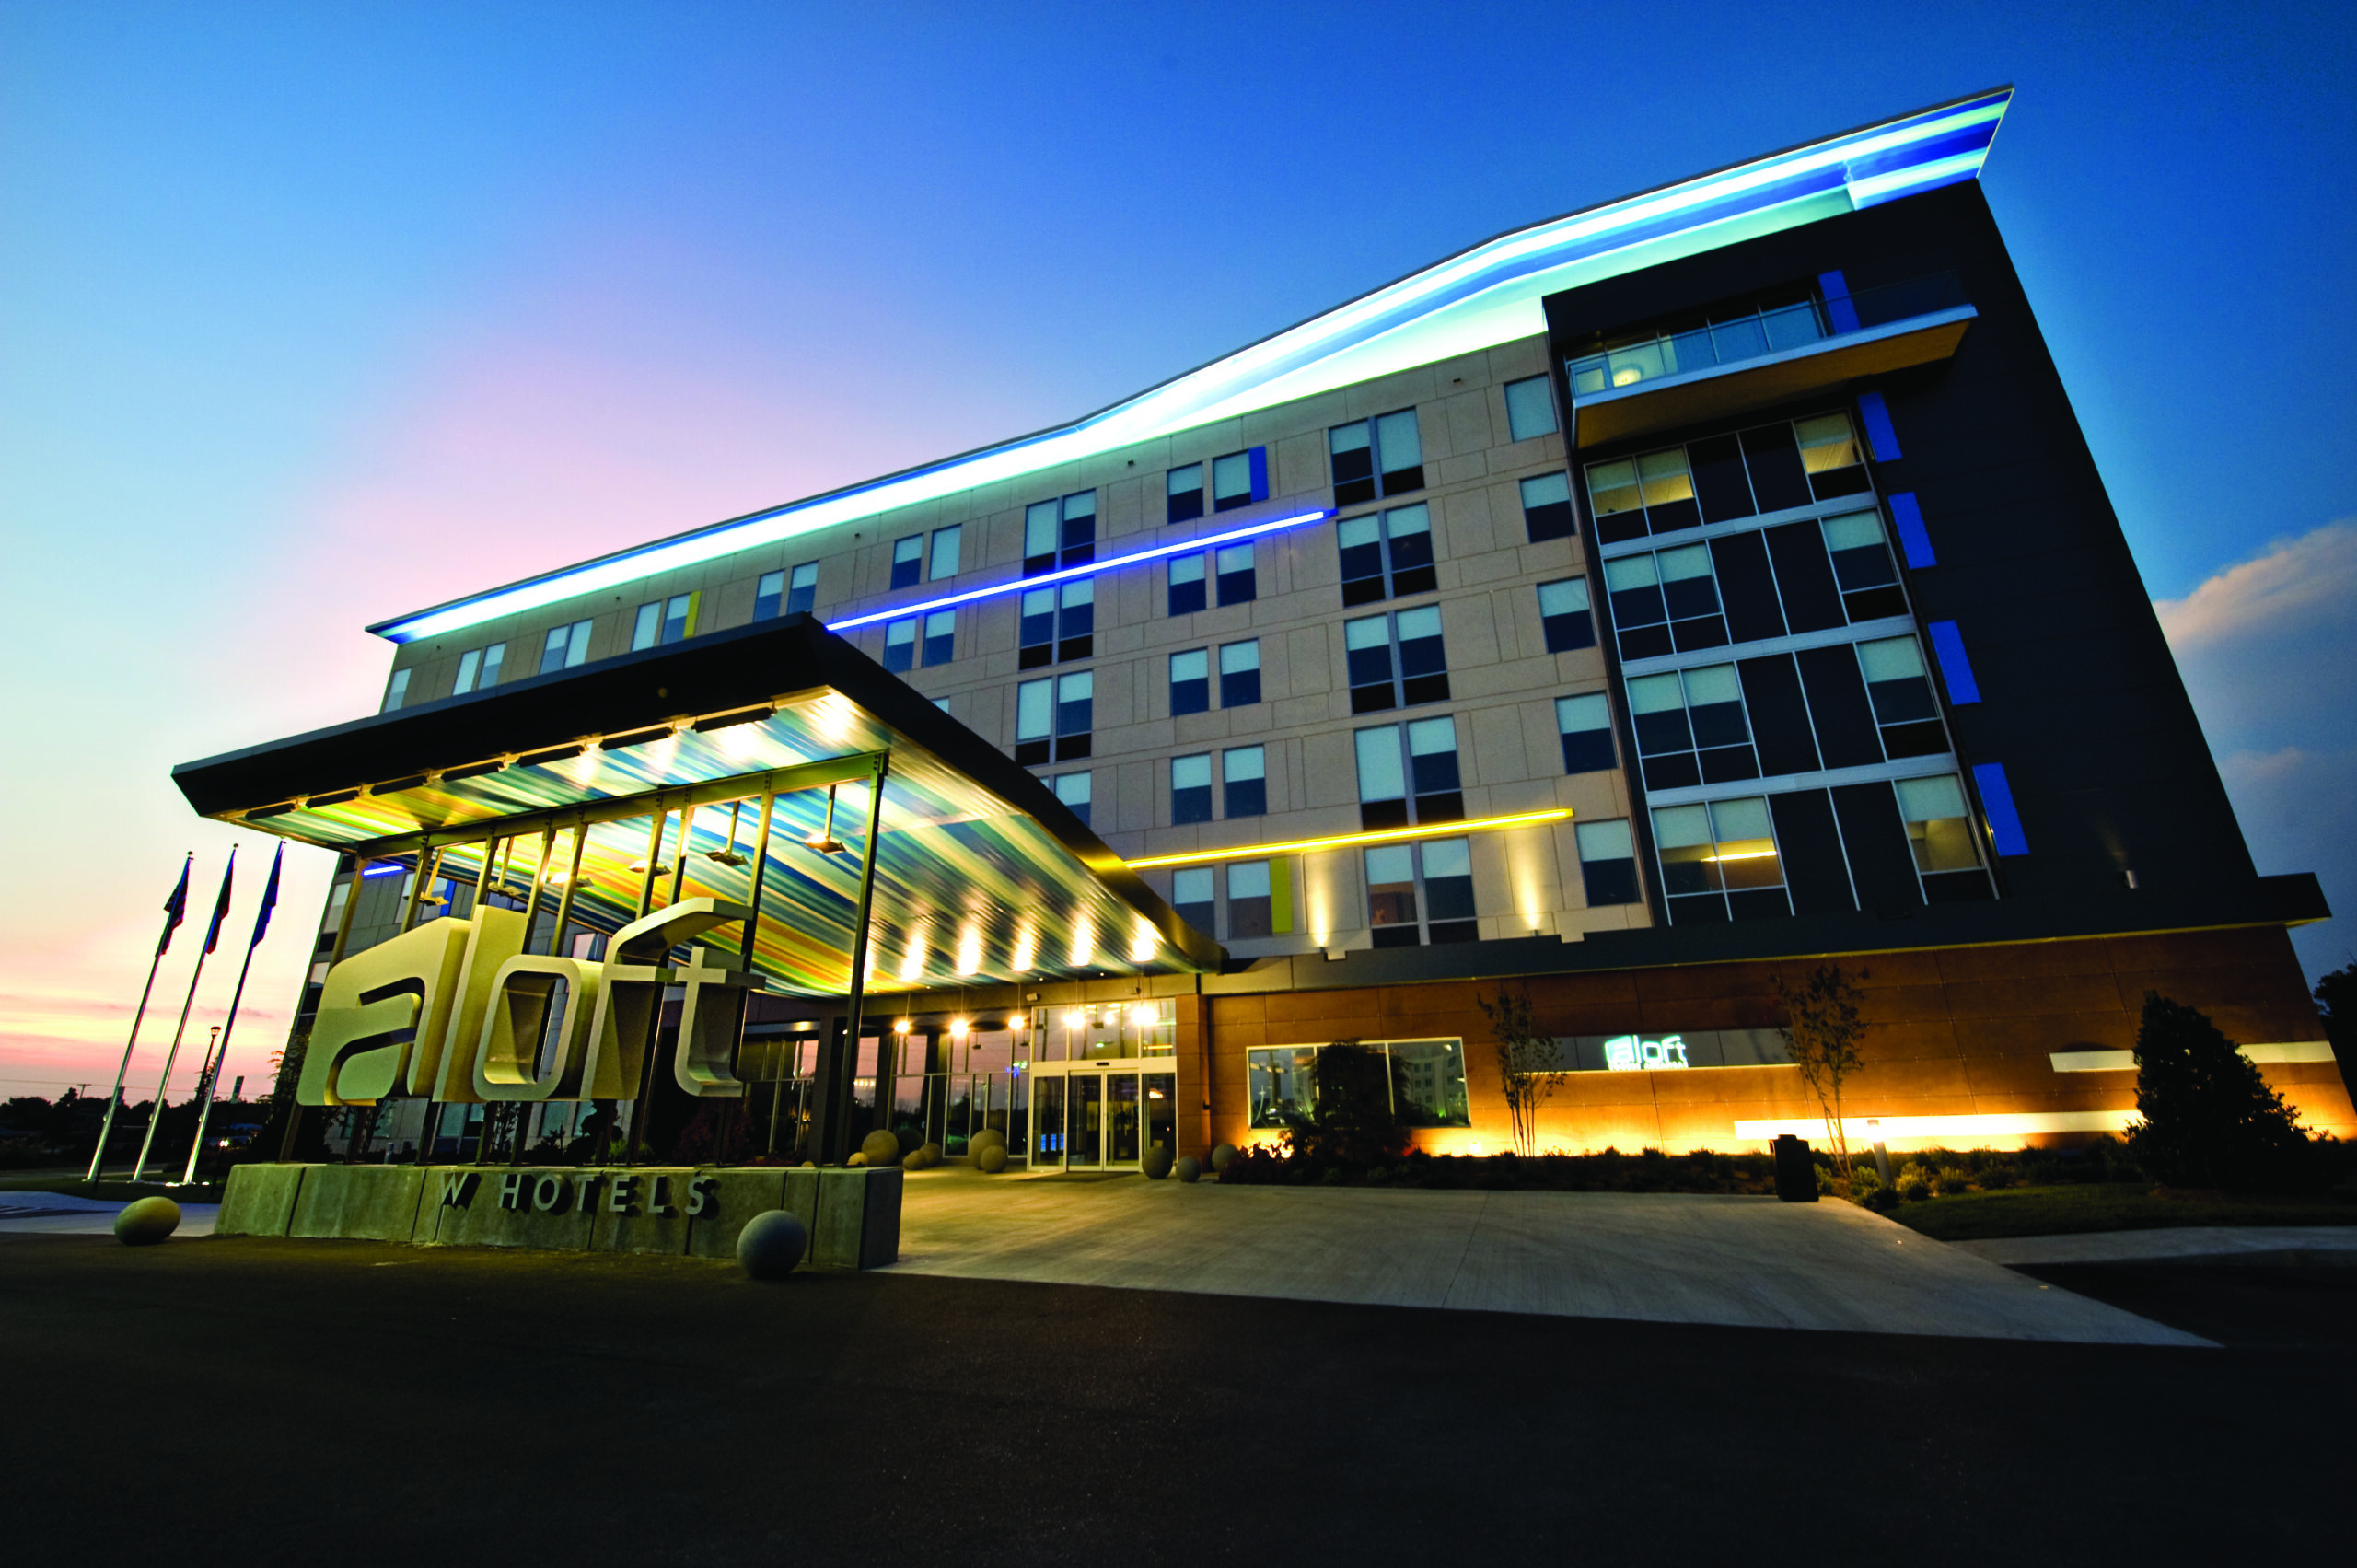 Exterior of Aloft Hotel in Rogers.